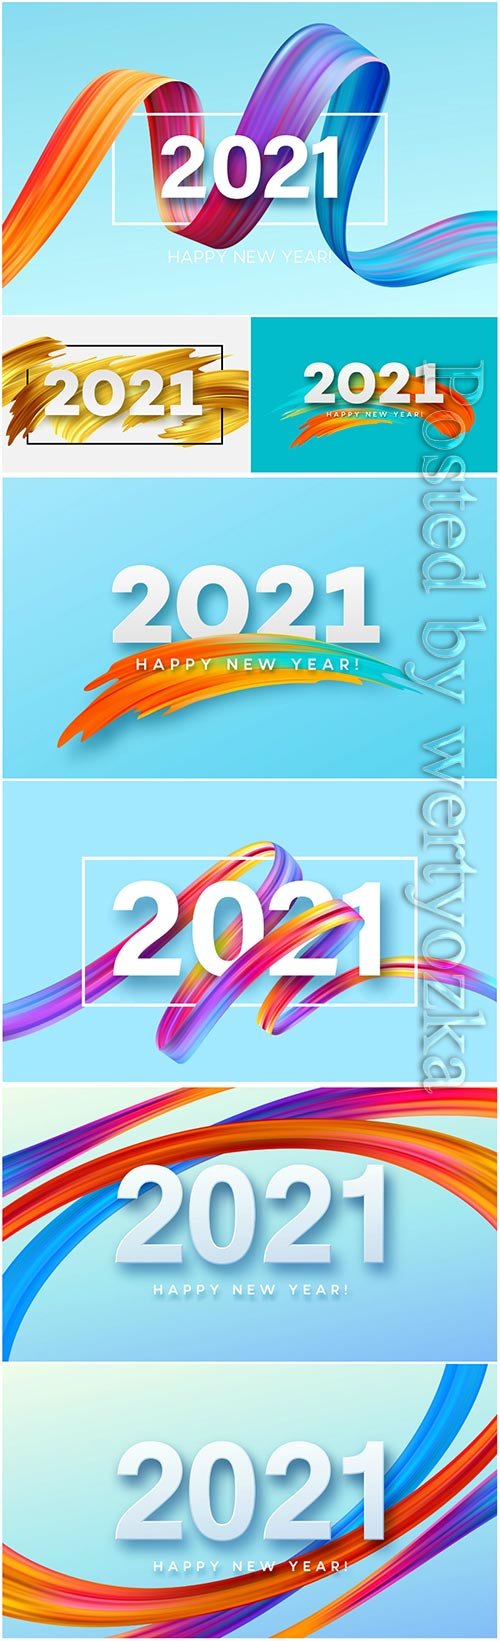 2021 happy new year color flow background